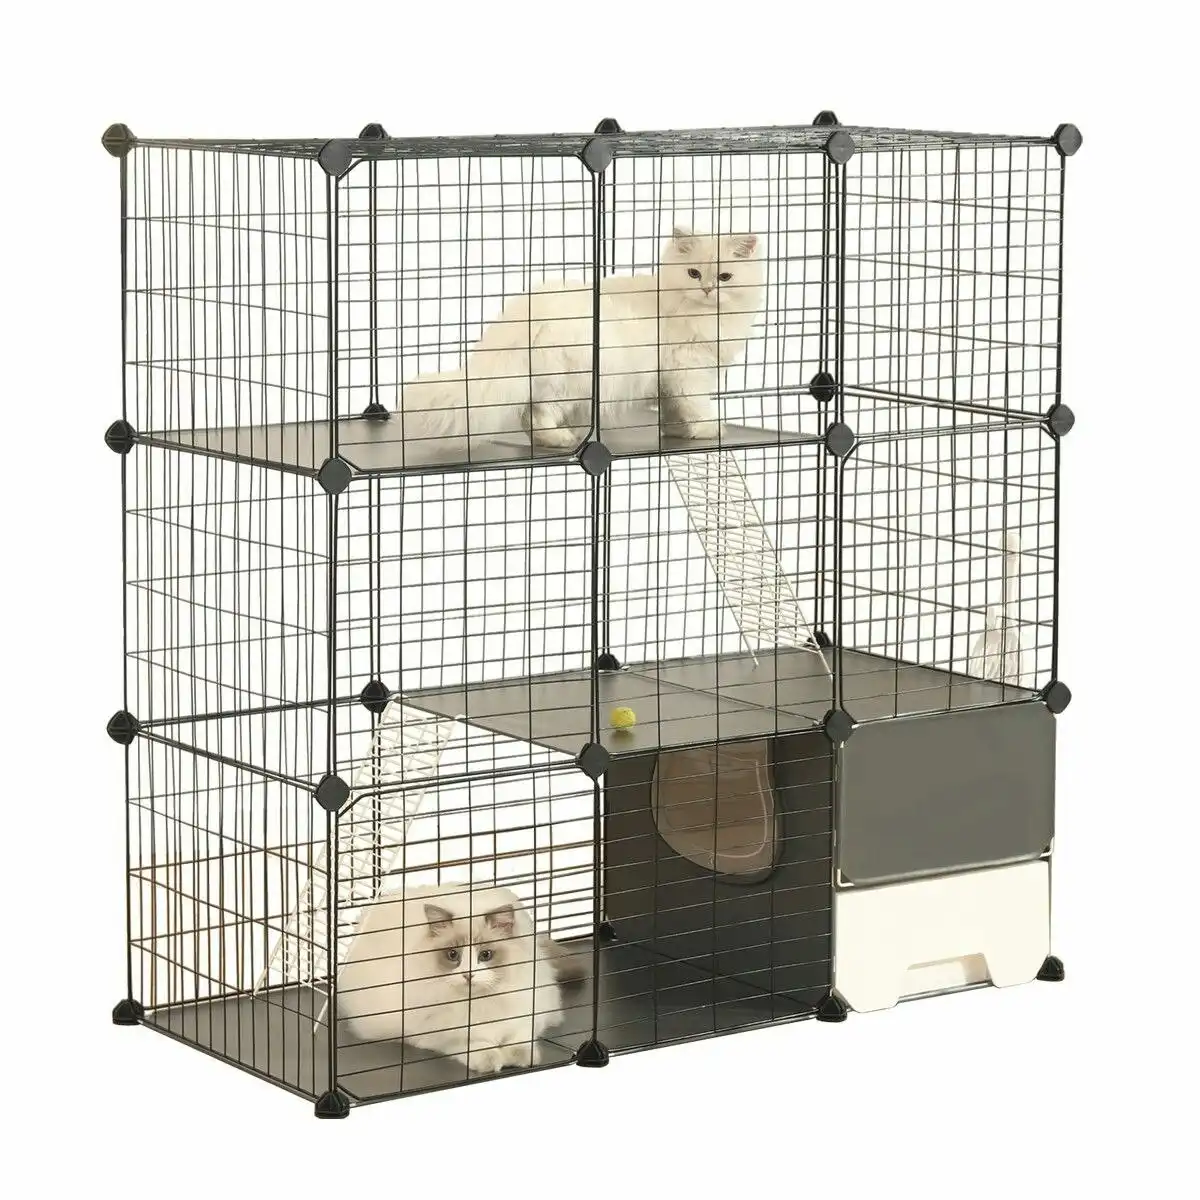 Pet Scene 3 Tier Cat Enclosure Cage Large DIY Pet Crate Rabbit Hutch Ferret Kitten Bunny House Fence Kennel Kitty Playpen with Litter Box Platforms Ramps